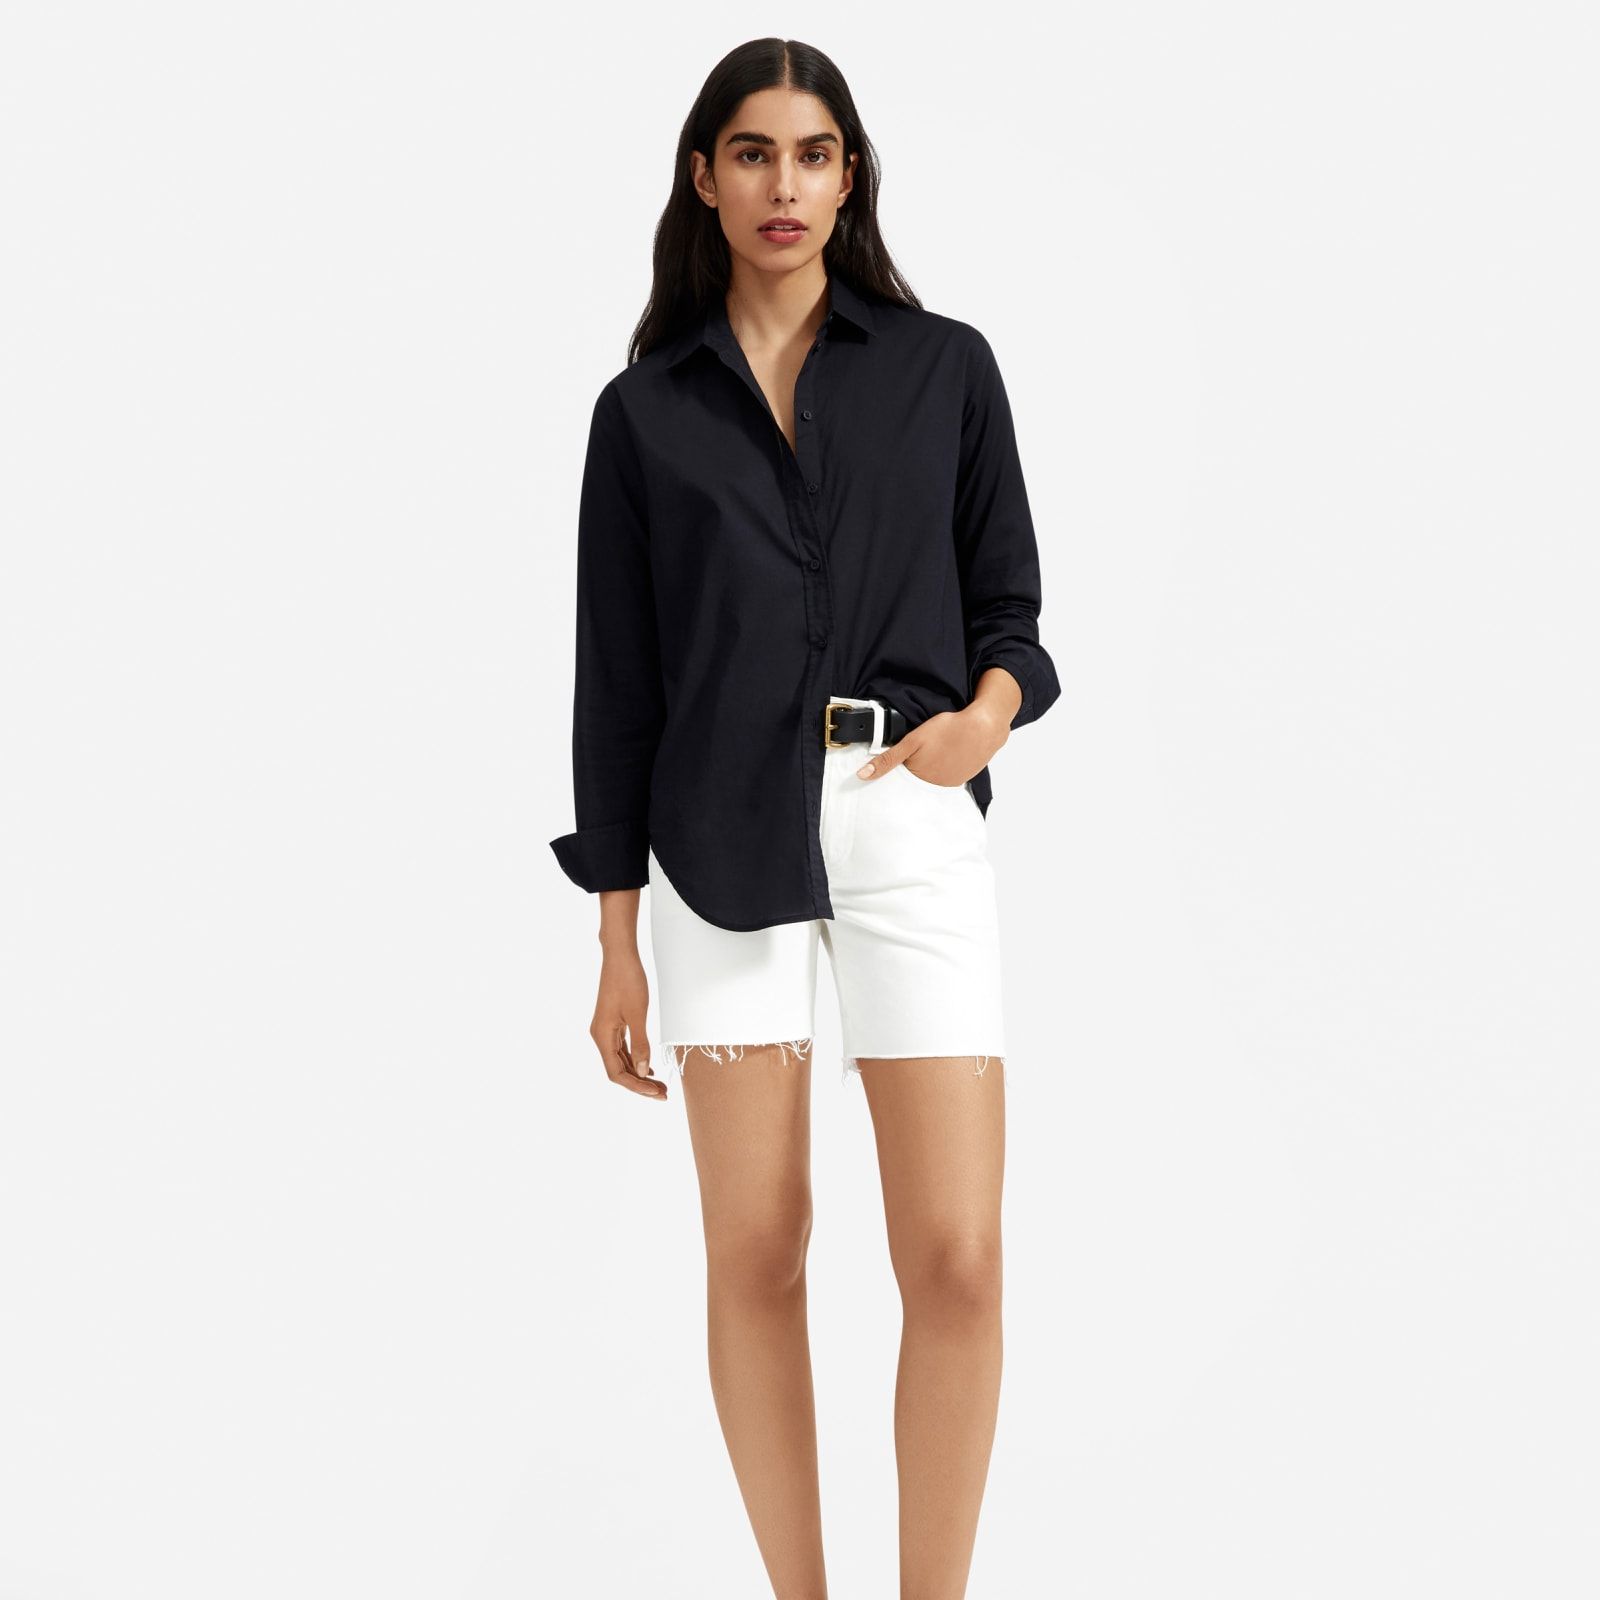 Women's Relaxed Air Shirt by Everlane in Black, Size 0 | Everlane